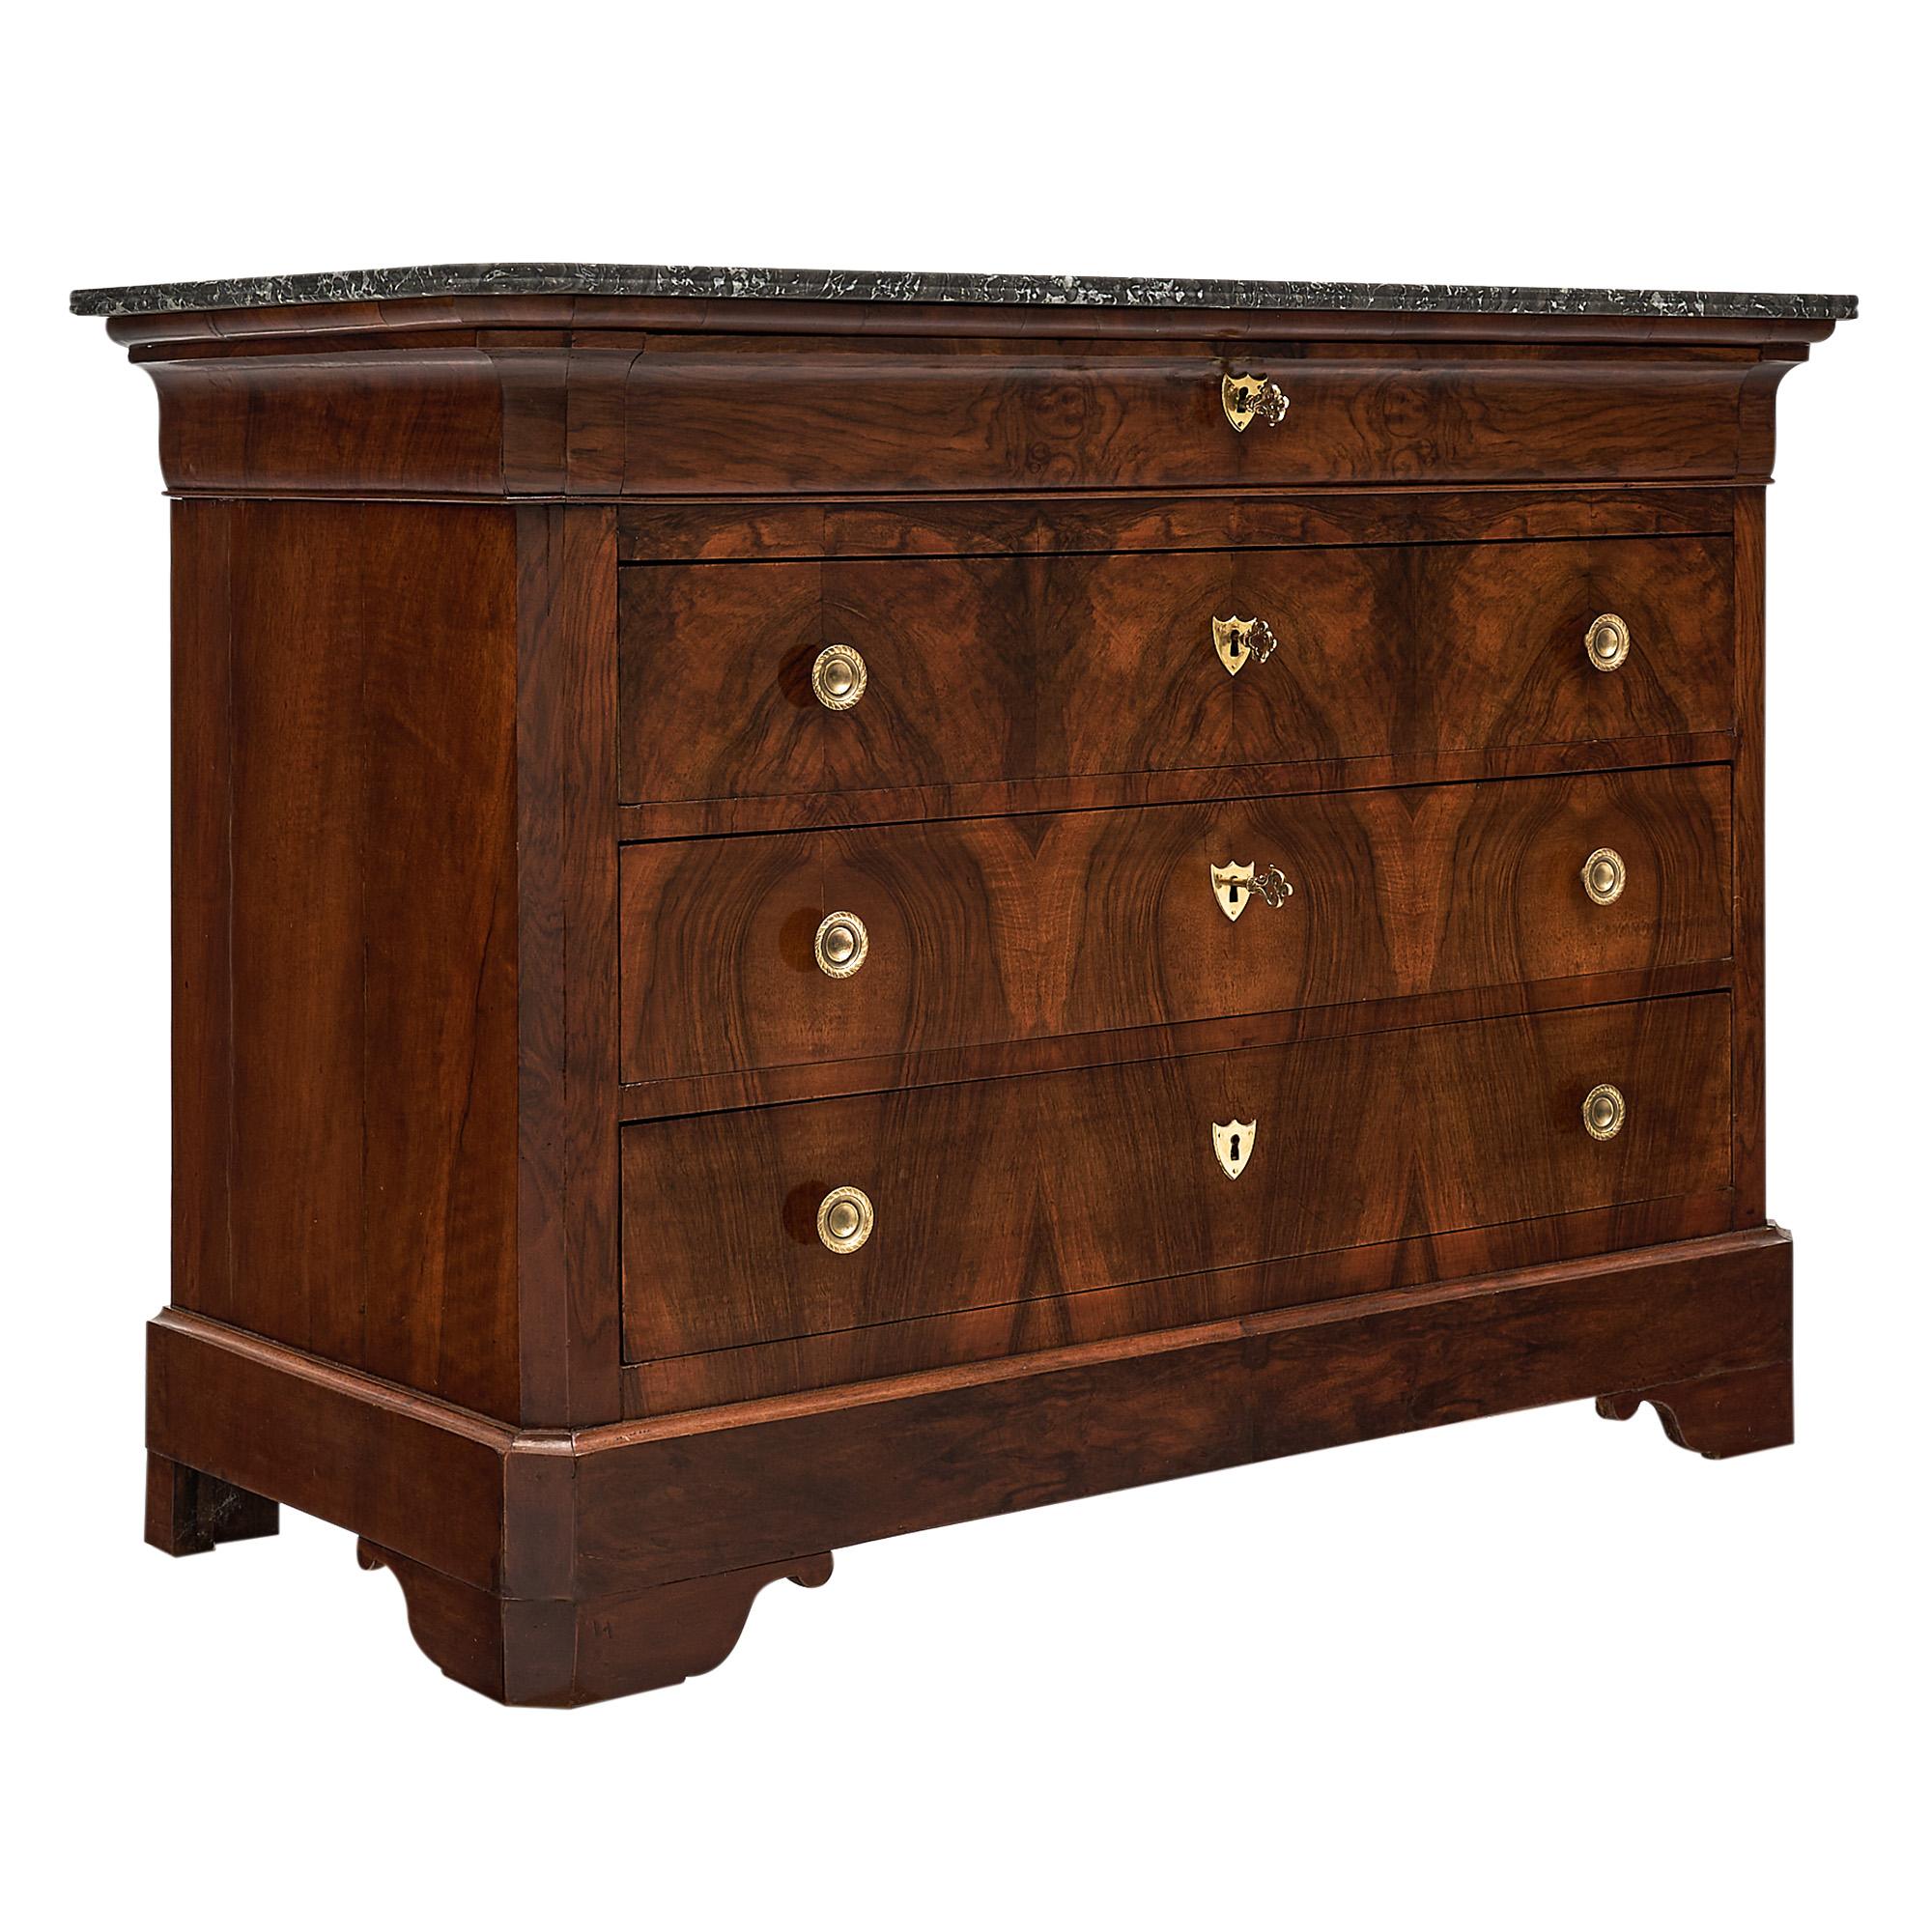 Chest, French, from the Louis Philippe period made of Cuban flamed mahogany. There are four dovetailed drawers, the top one being hidden in the “doucine” apron. Working locks and keys. There is an intact Sainte Anne marble slab top.